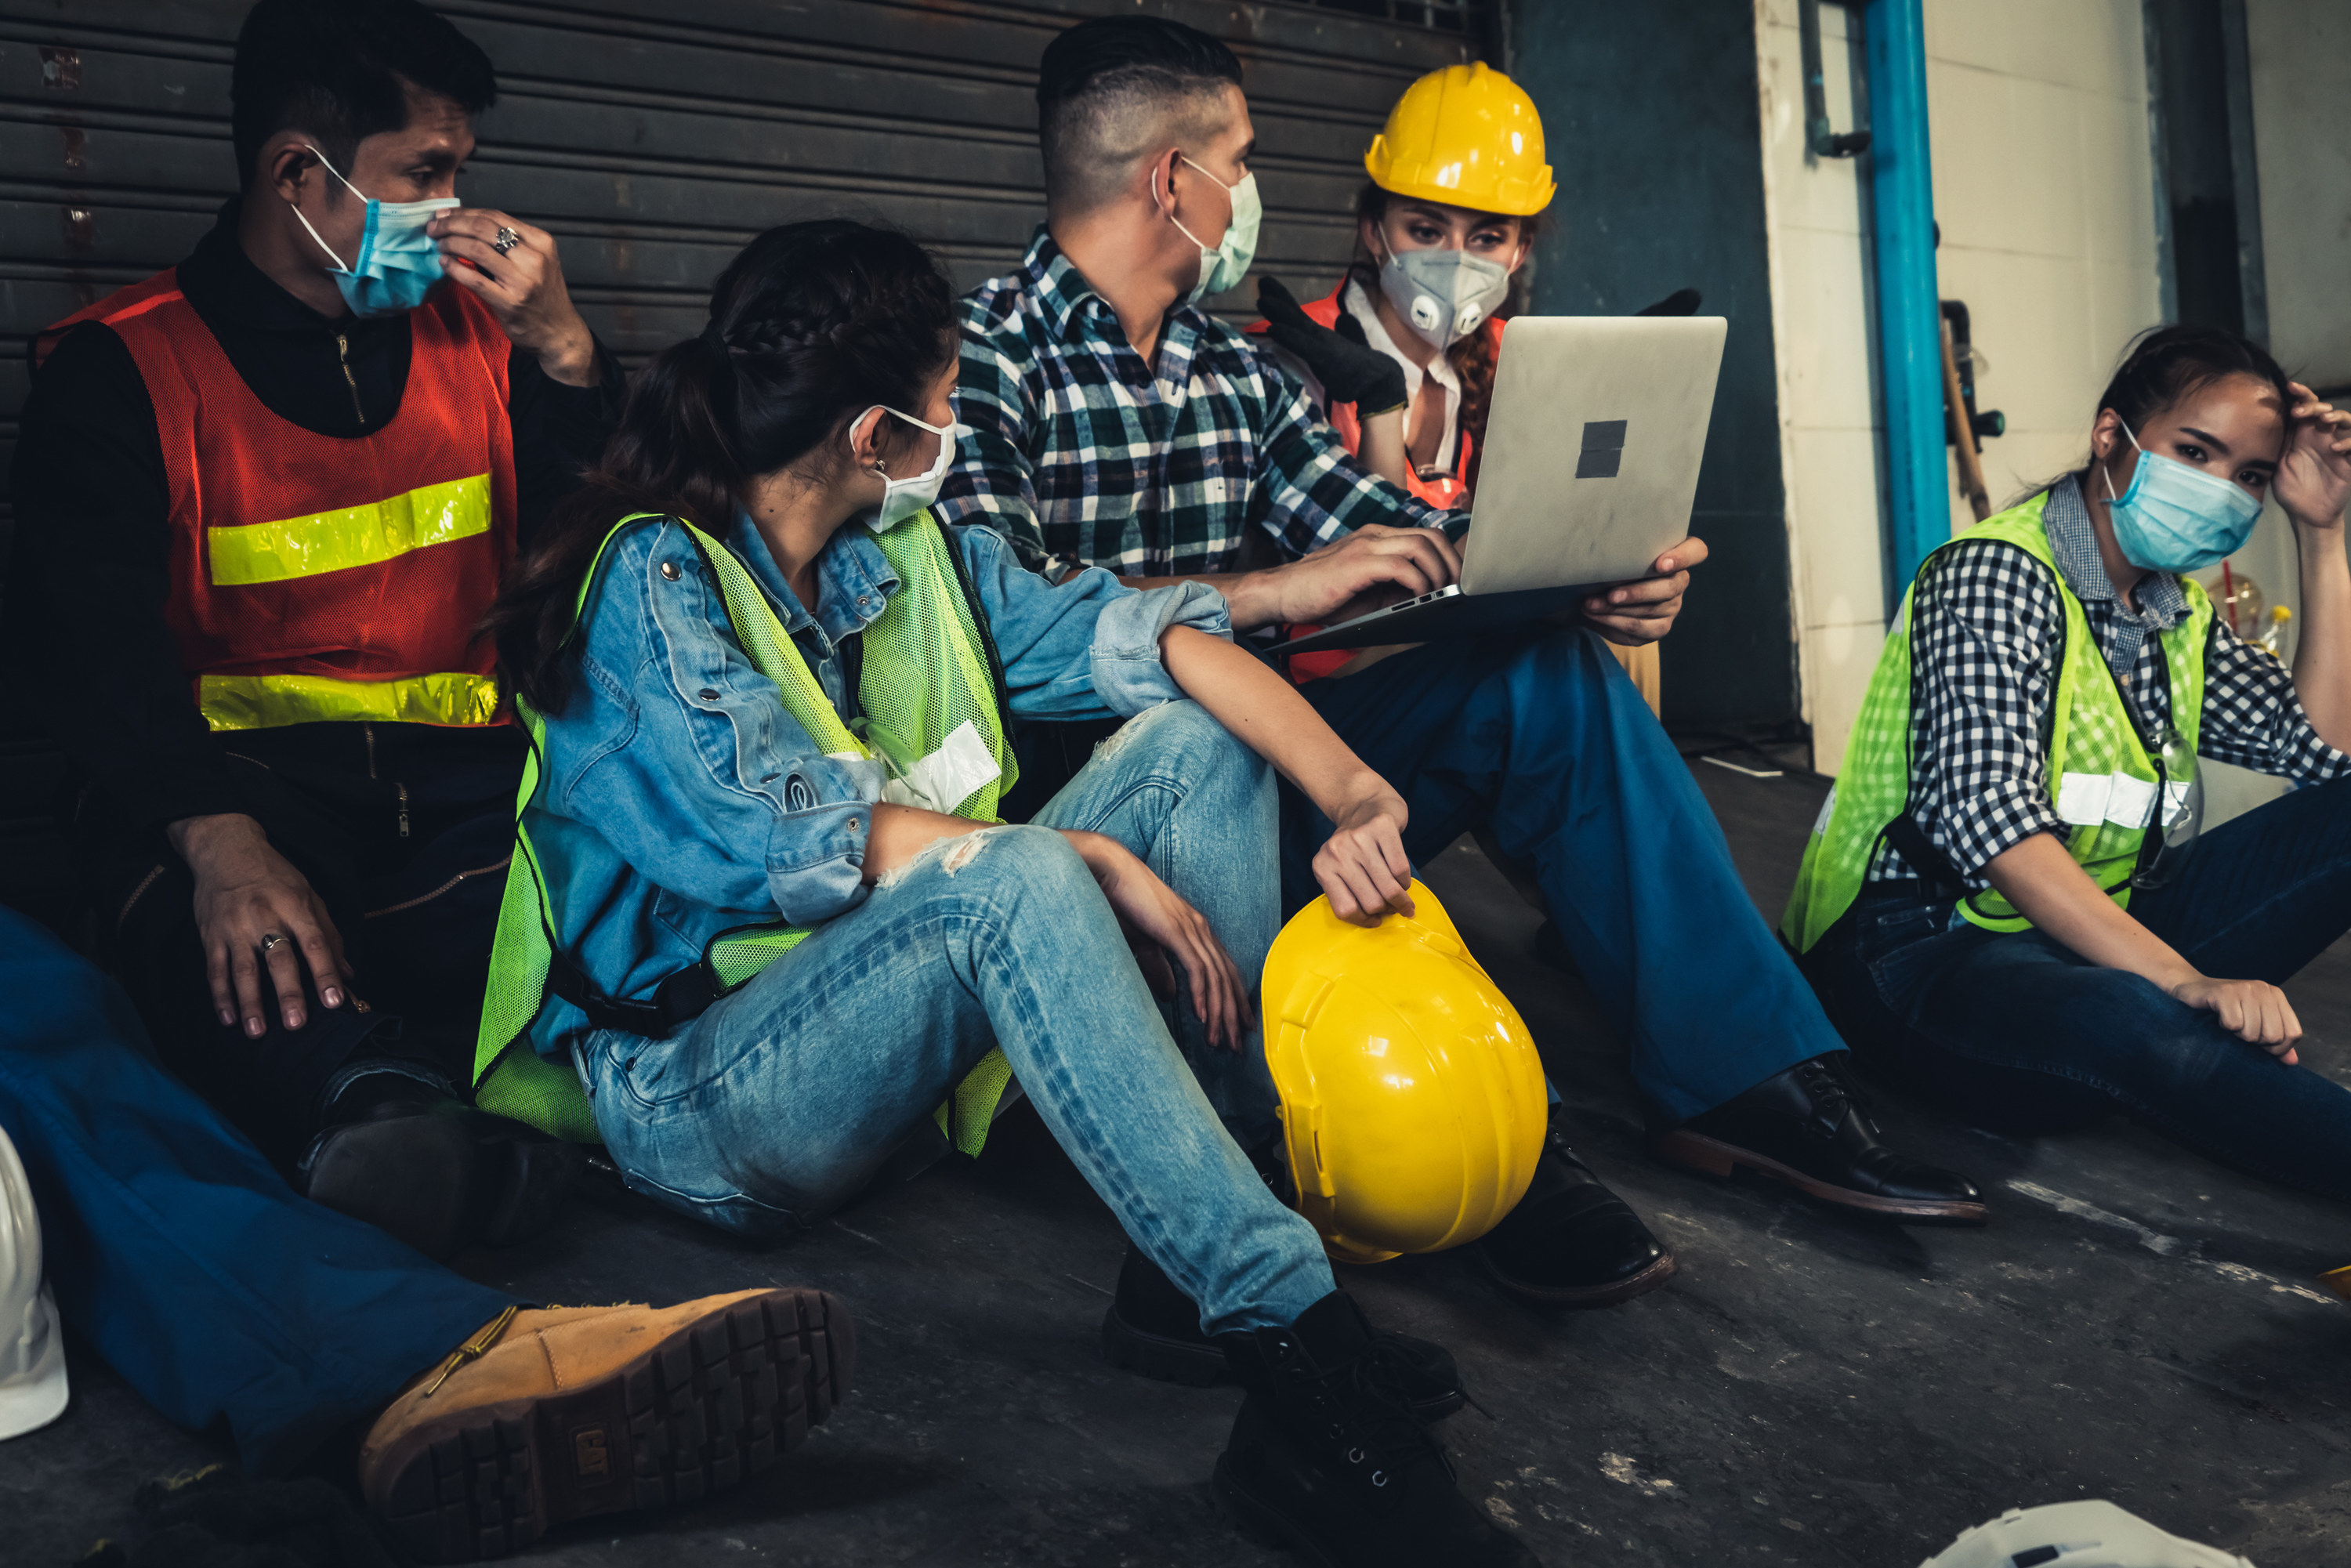 Construction workers taking a break on a jobsite